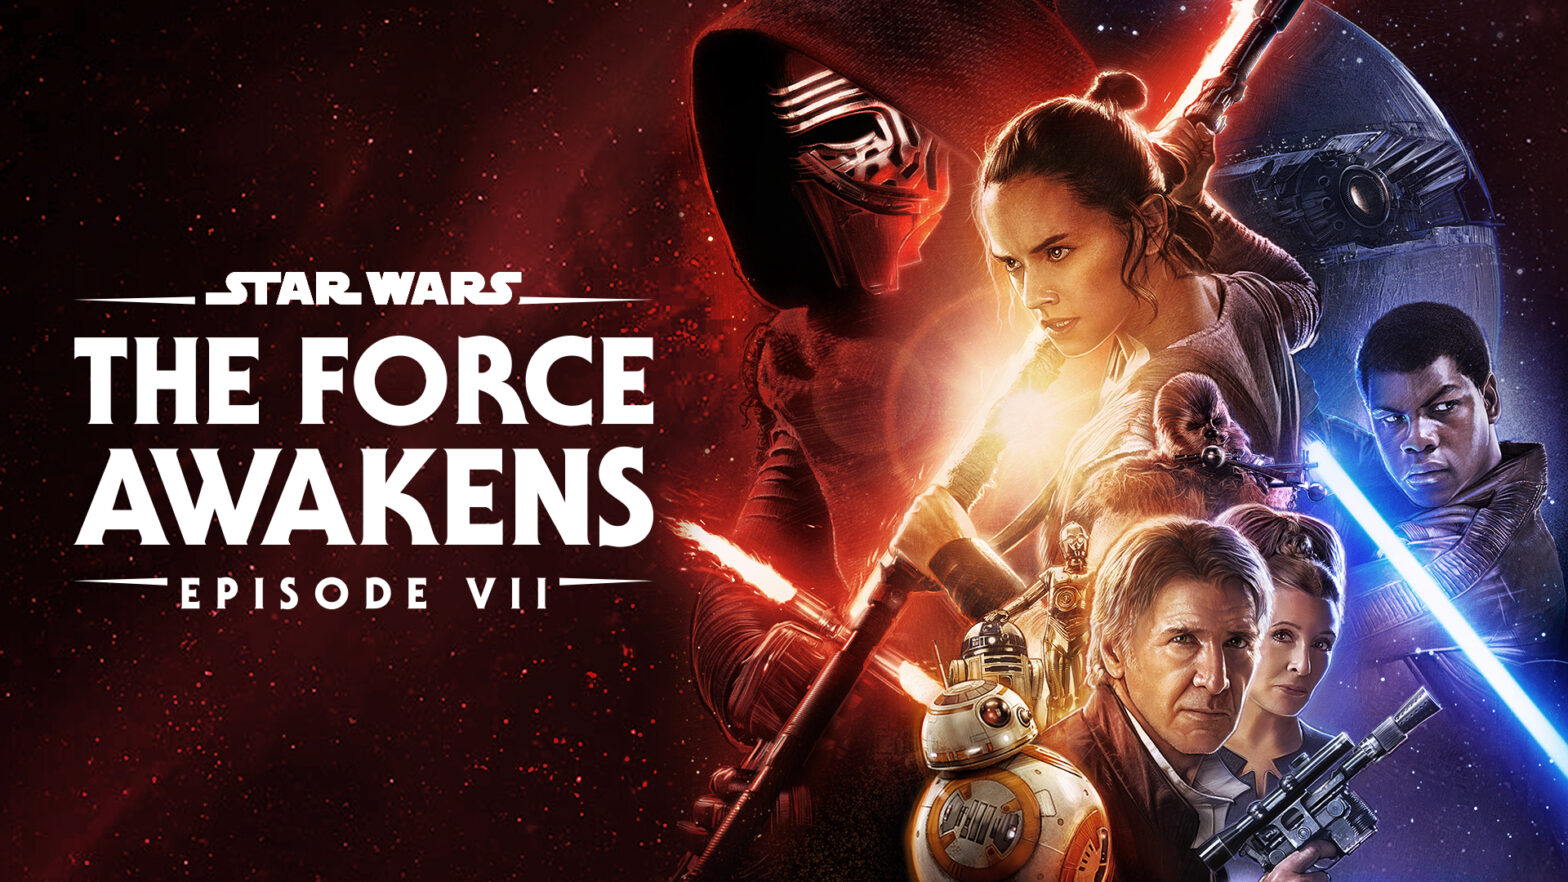 Star Wars Ep. VII: The Force Awakens for windows download free